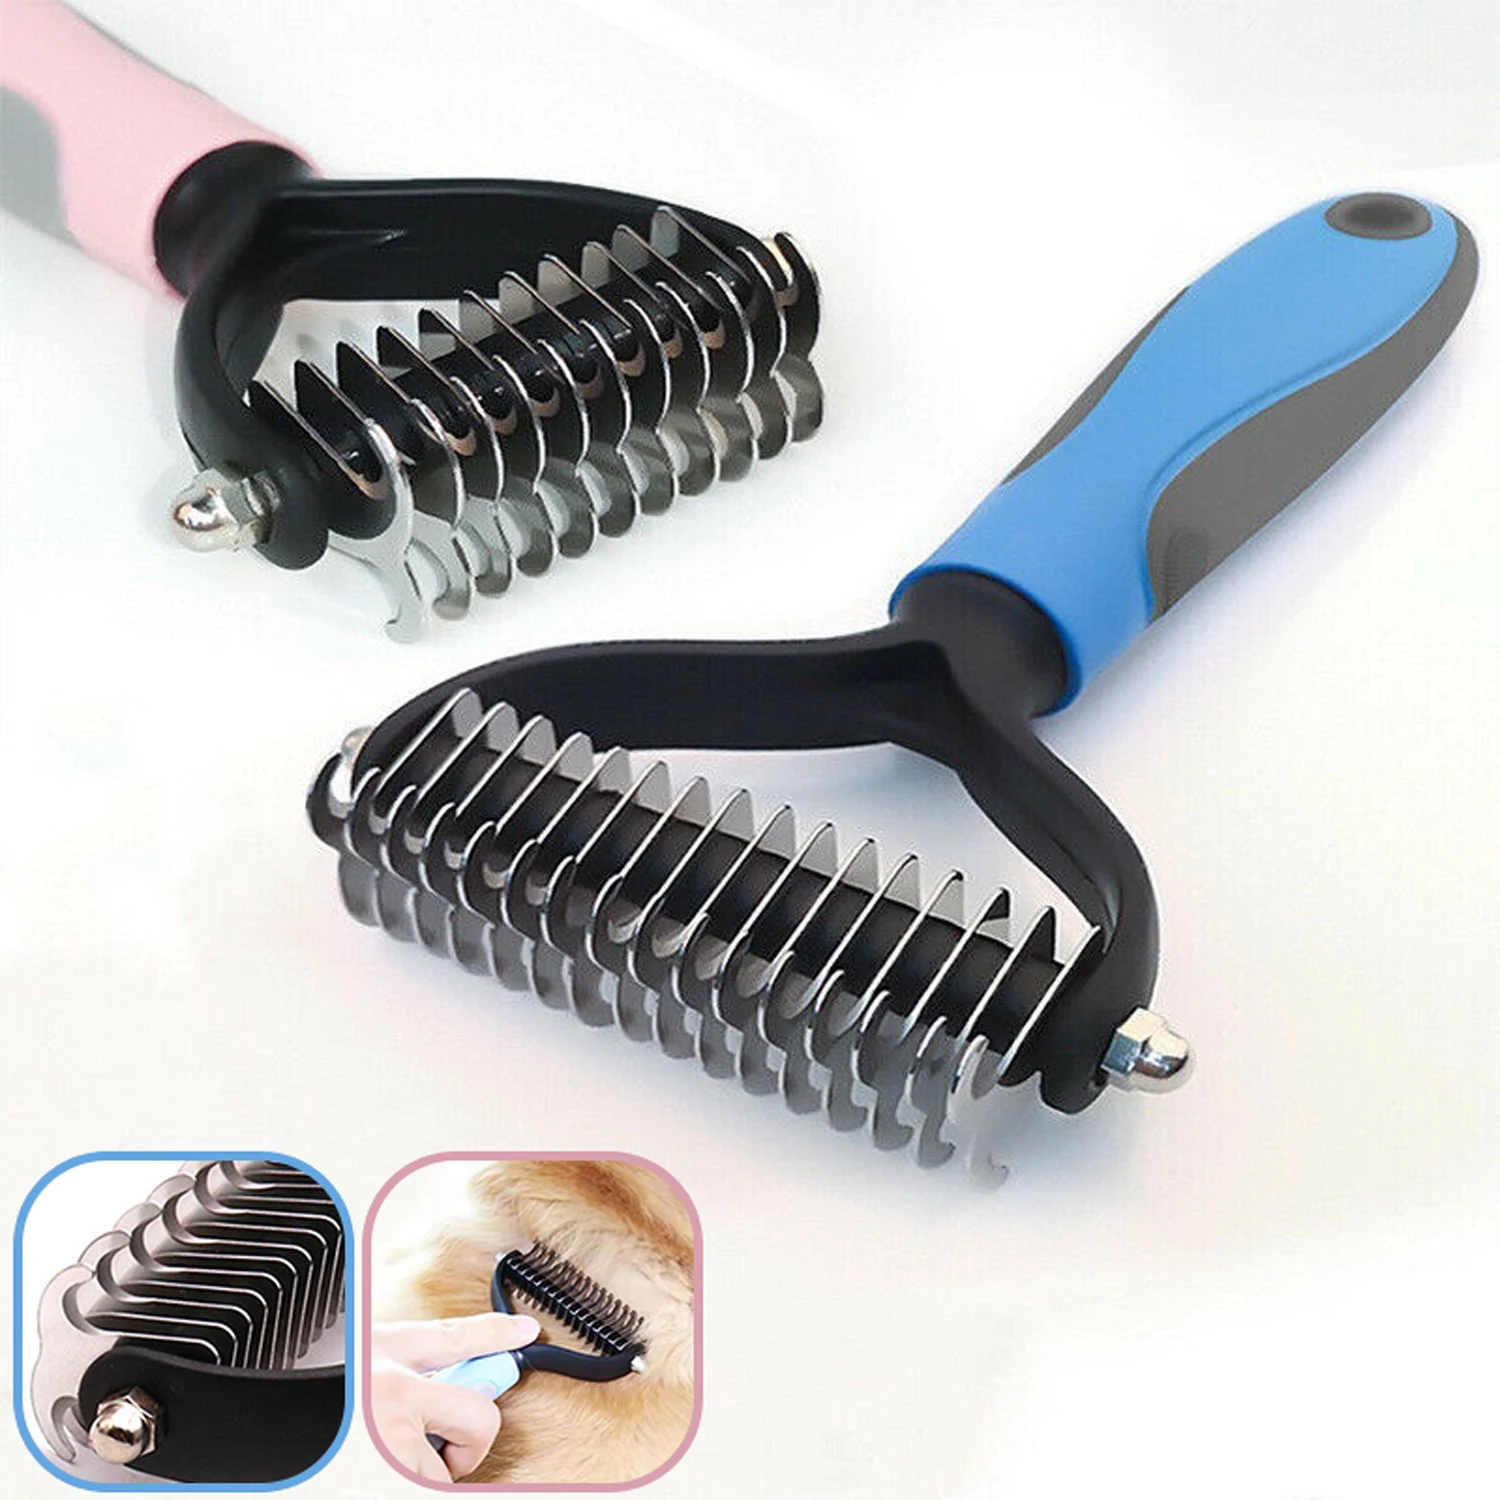 

Hair Removal Comb for Dogs Cat Detangler Fur Trimming Dematting Deshedding Brush Grooming Tool For matted Long Hair Curly pet